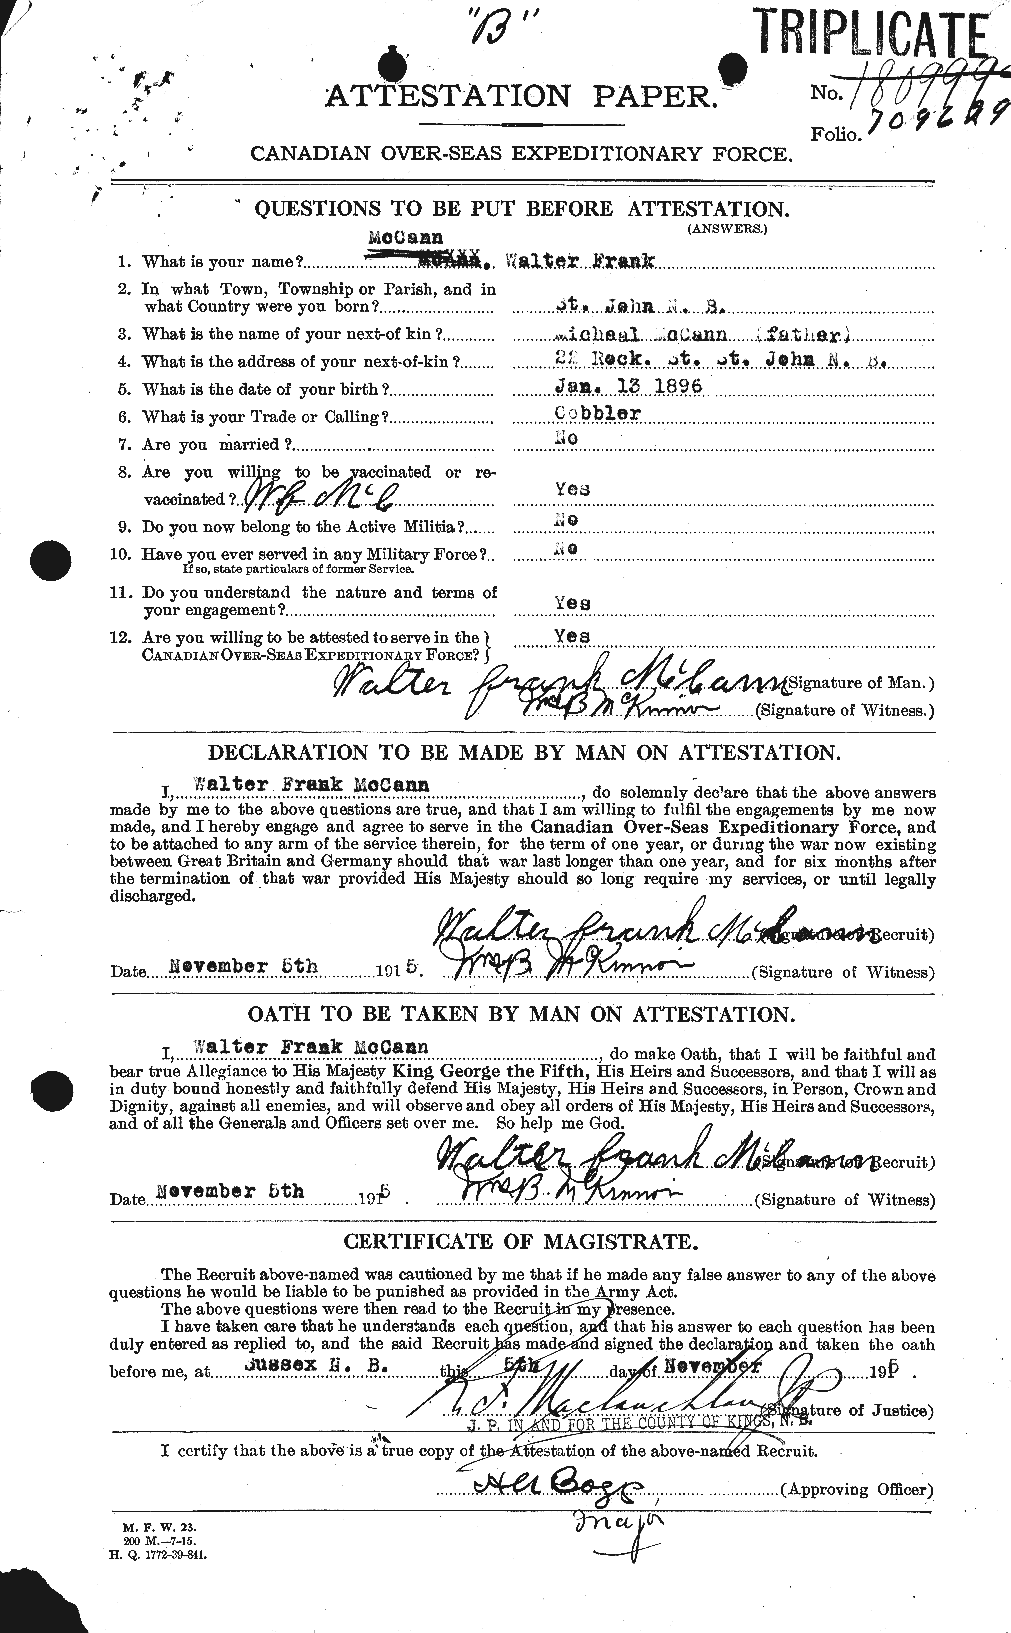 Personnel Records of the First World War - CEF 132667a